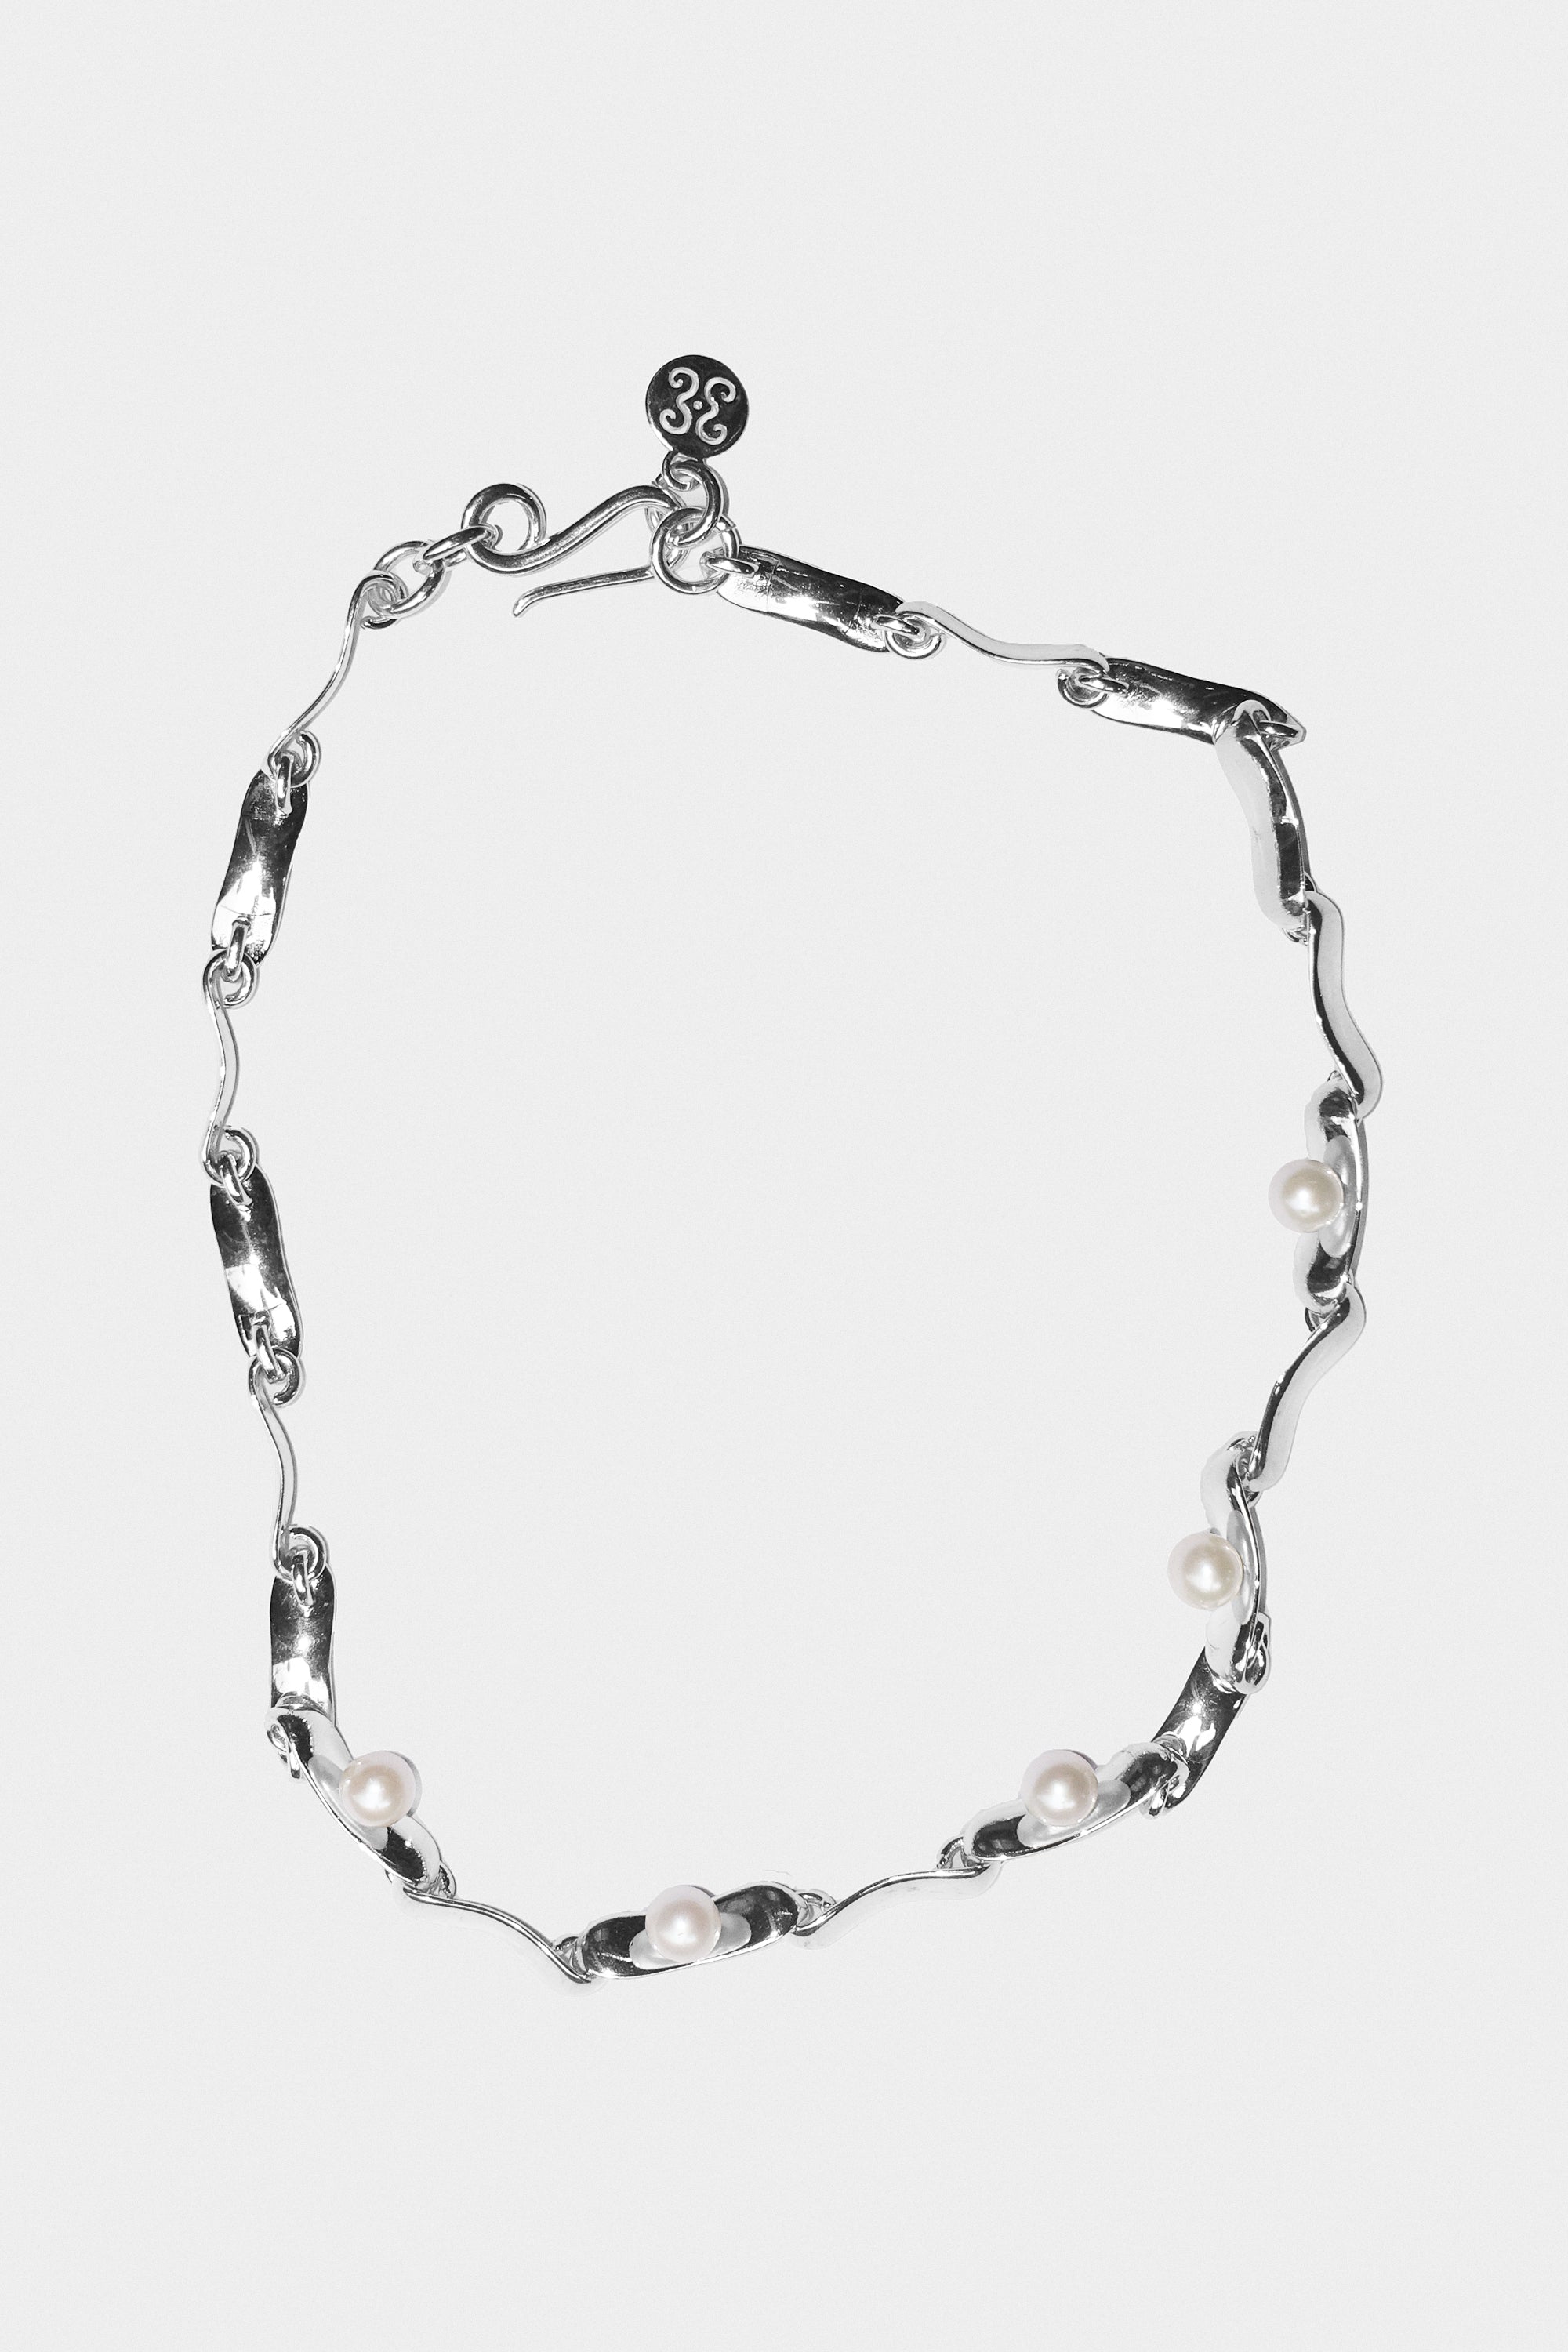 Synthesis Pearl Necklace in Sterling Silver by Sapir Bachar